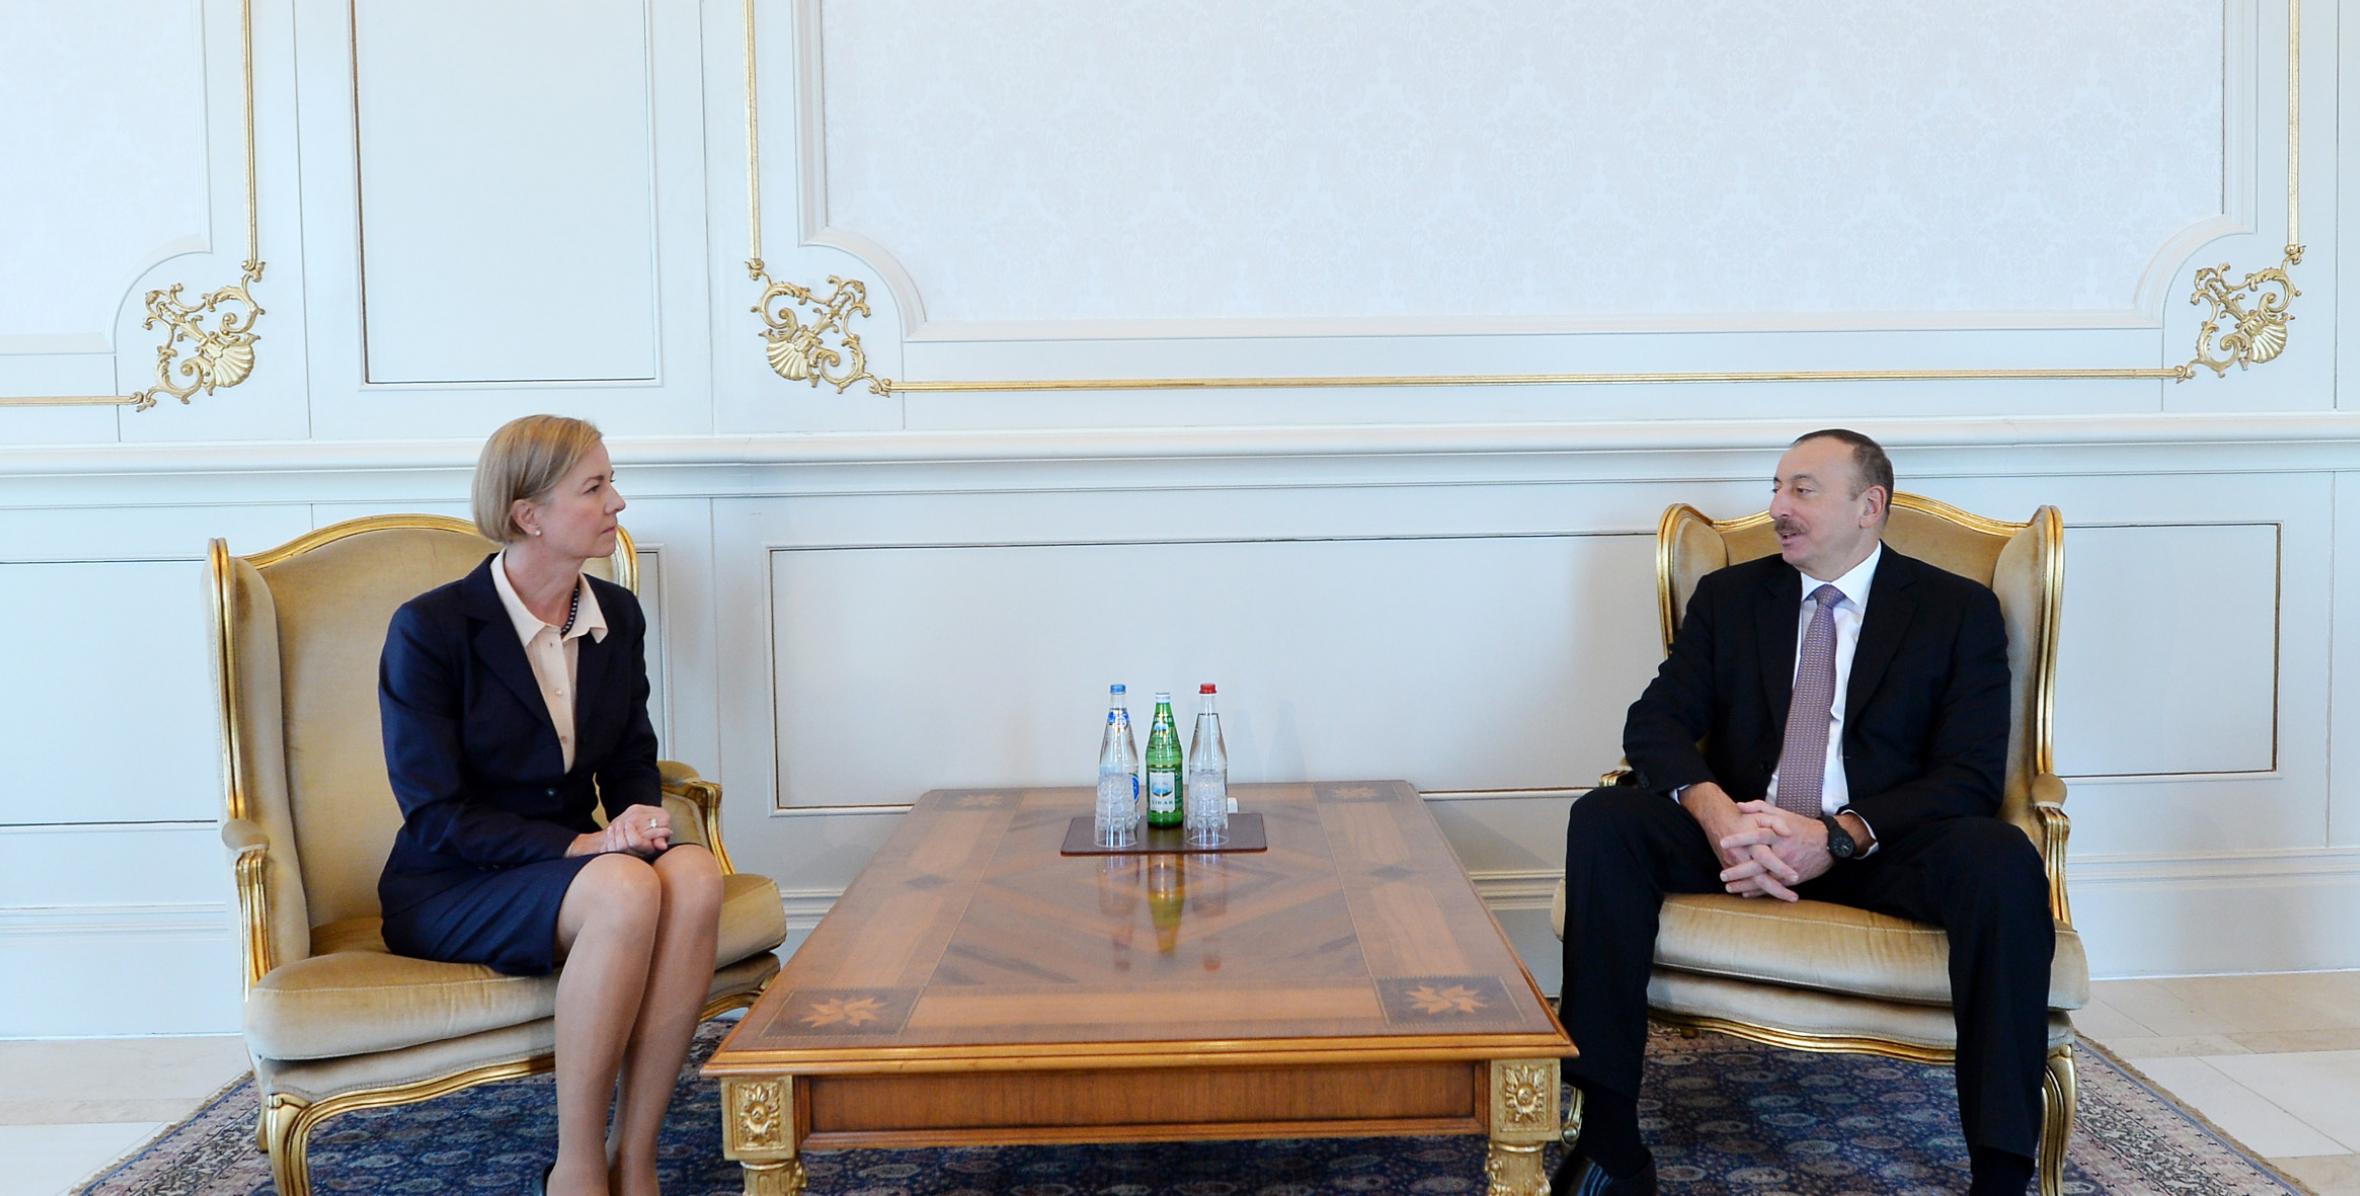 Ilham Aliyev received the credentials of the incoming Swedish Ambassador